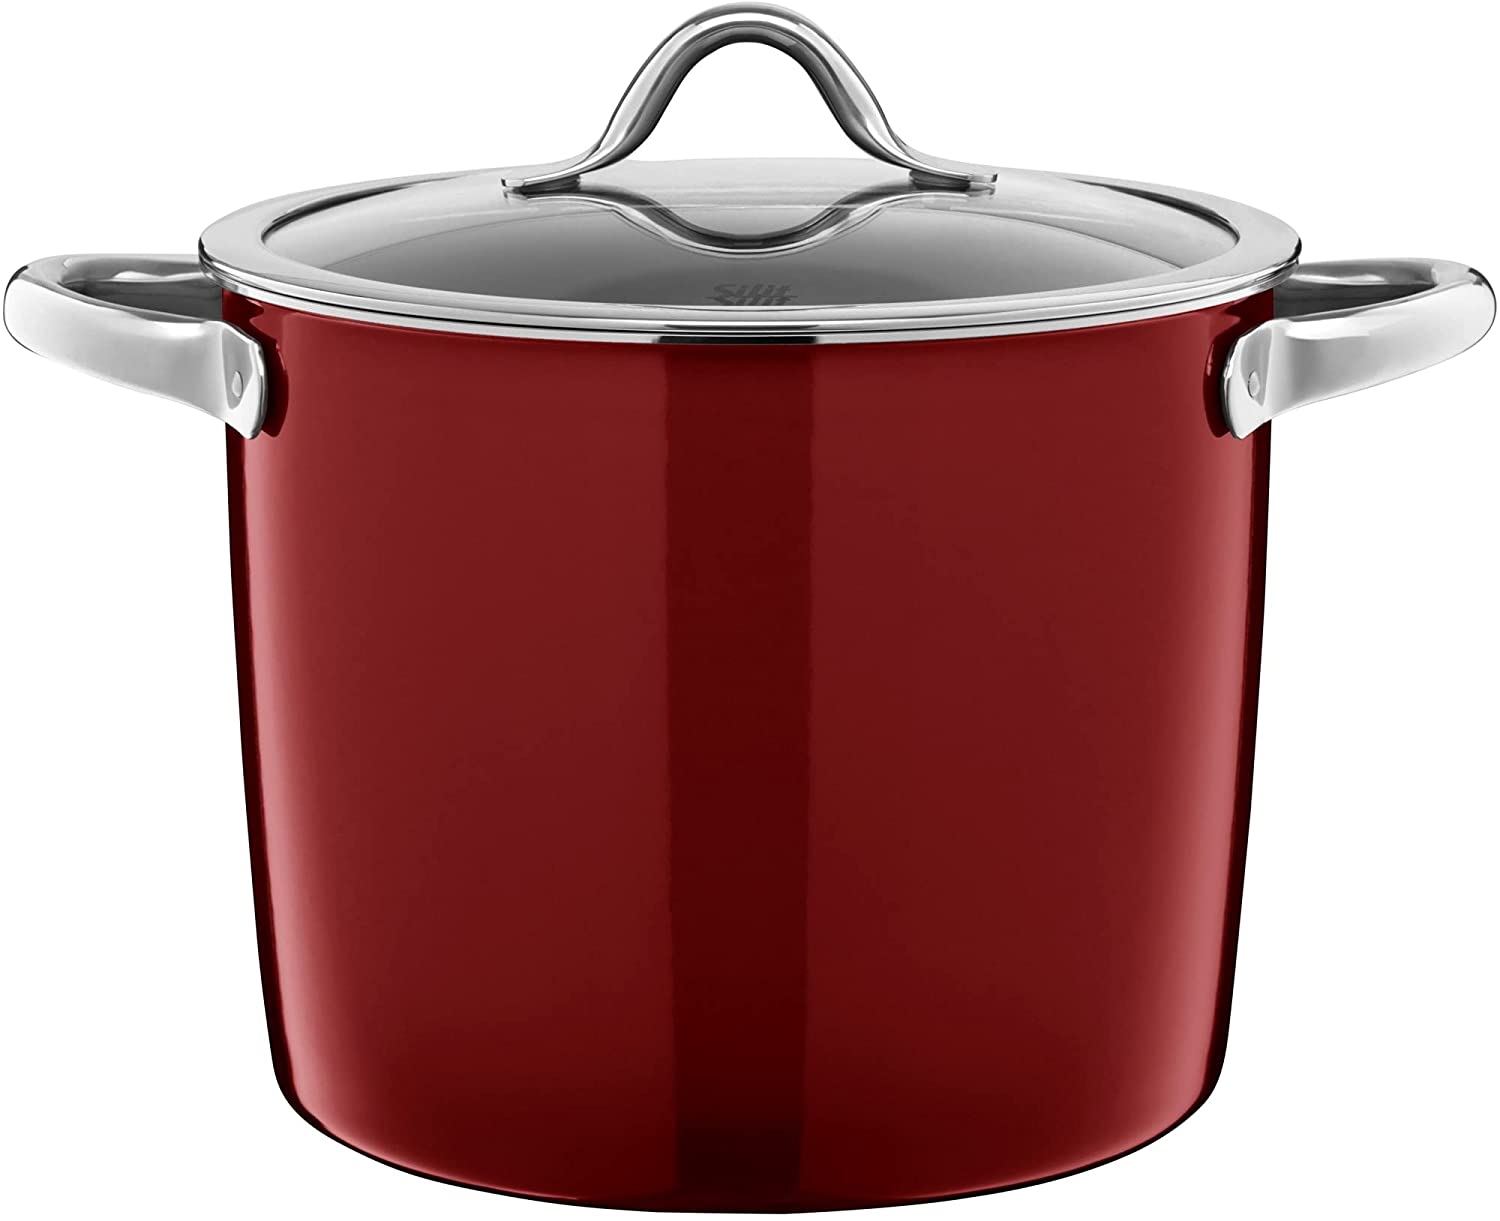 Silit Vitaliano Rosso Vegetable Pot 24 cm Glass Lid Large 8.5 L Silargan Functional Ceramic Induction Pot Dark Red